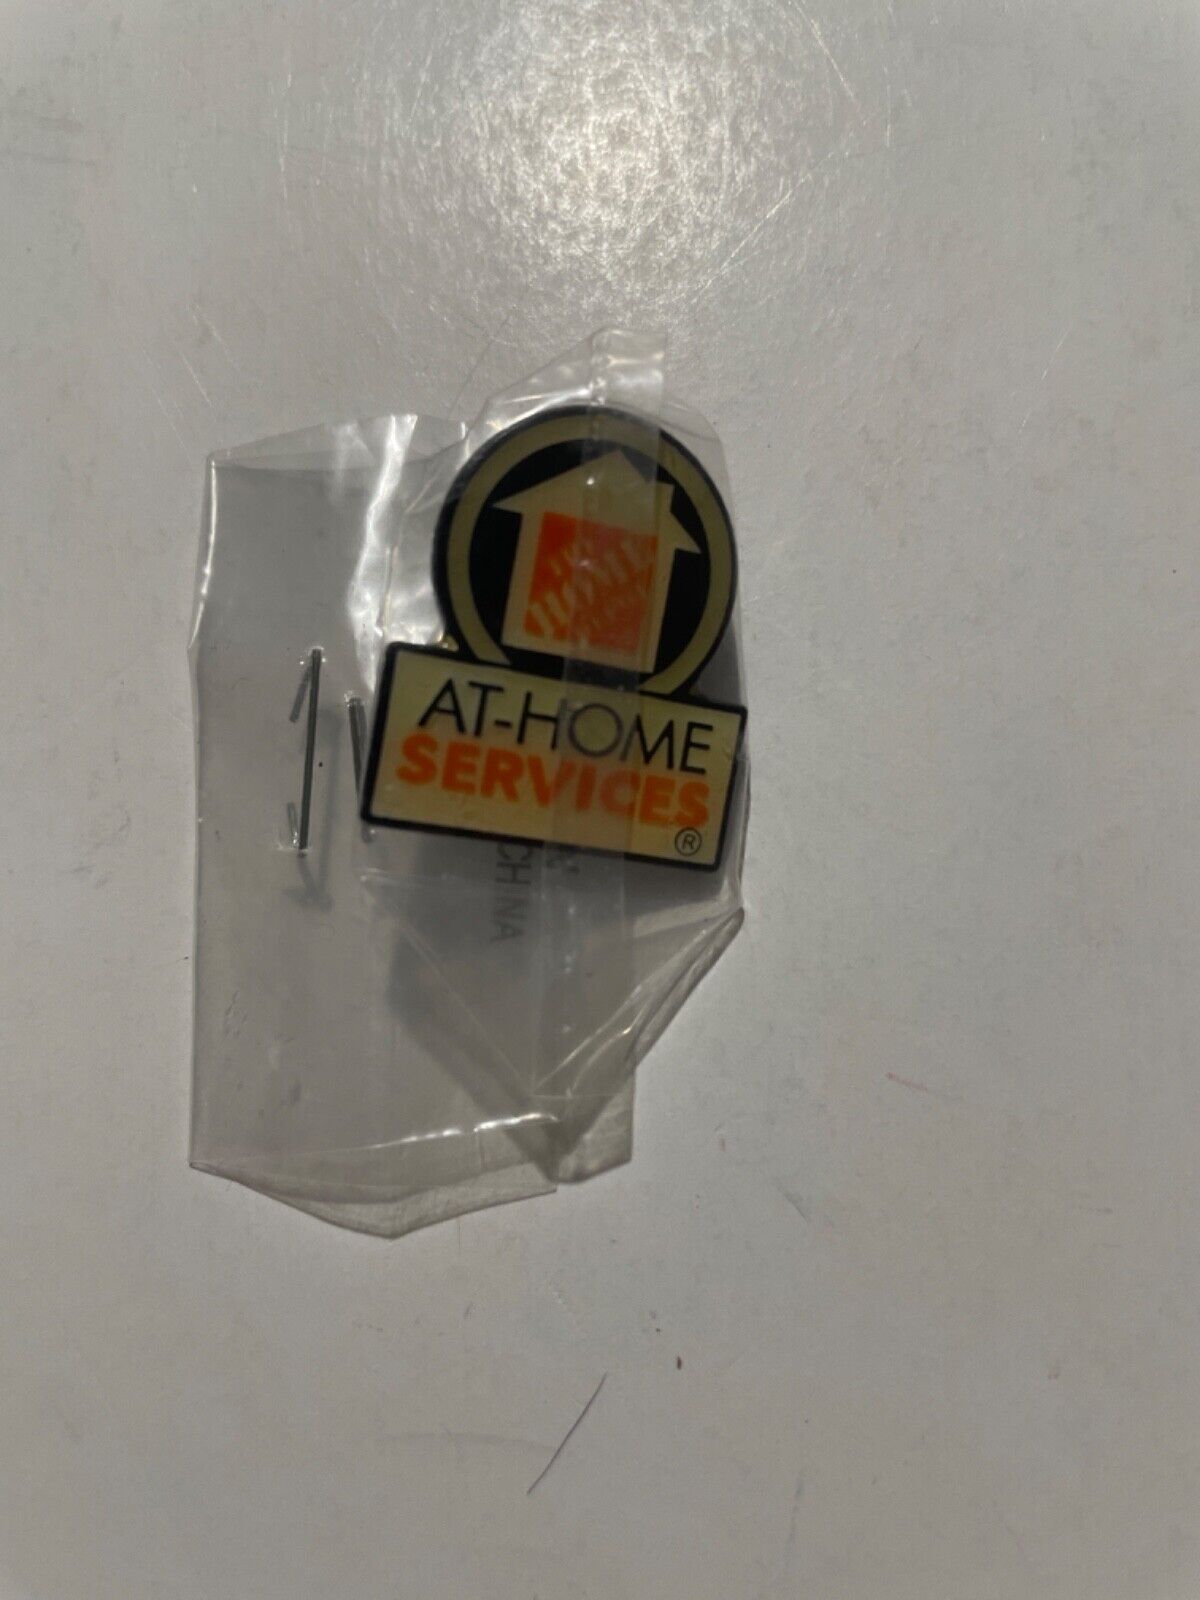 Home Depot At-Home Services Lapel Pin sealed